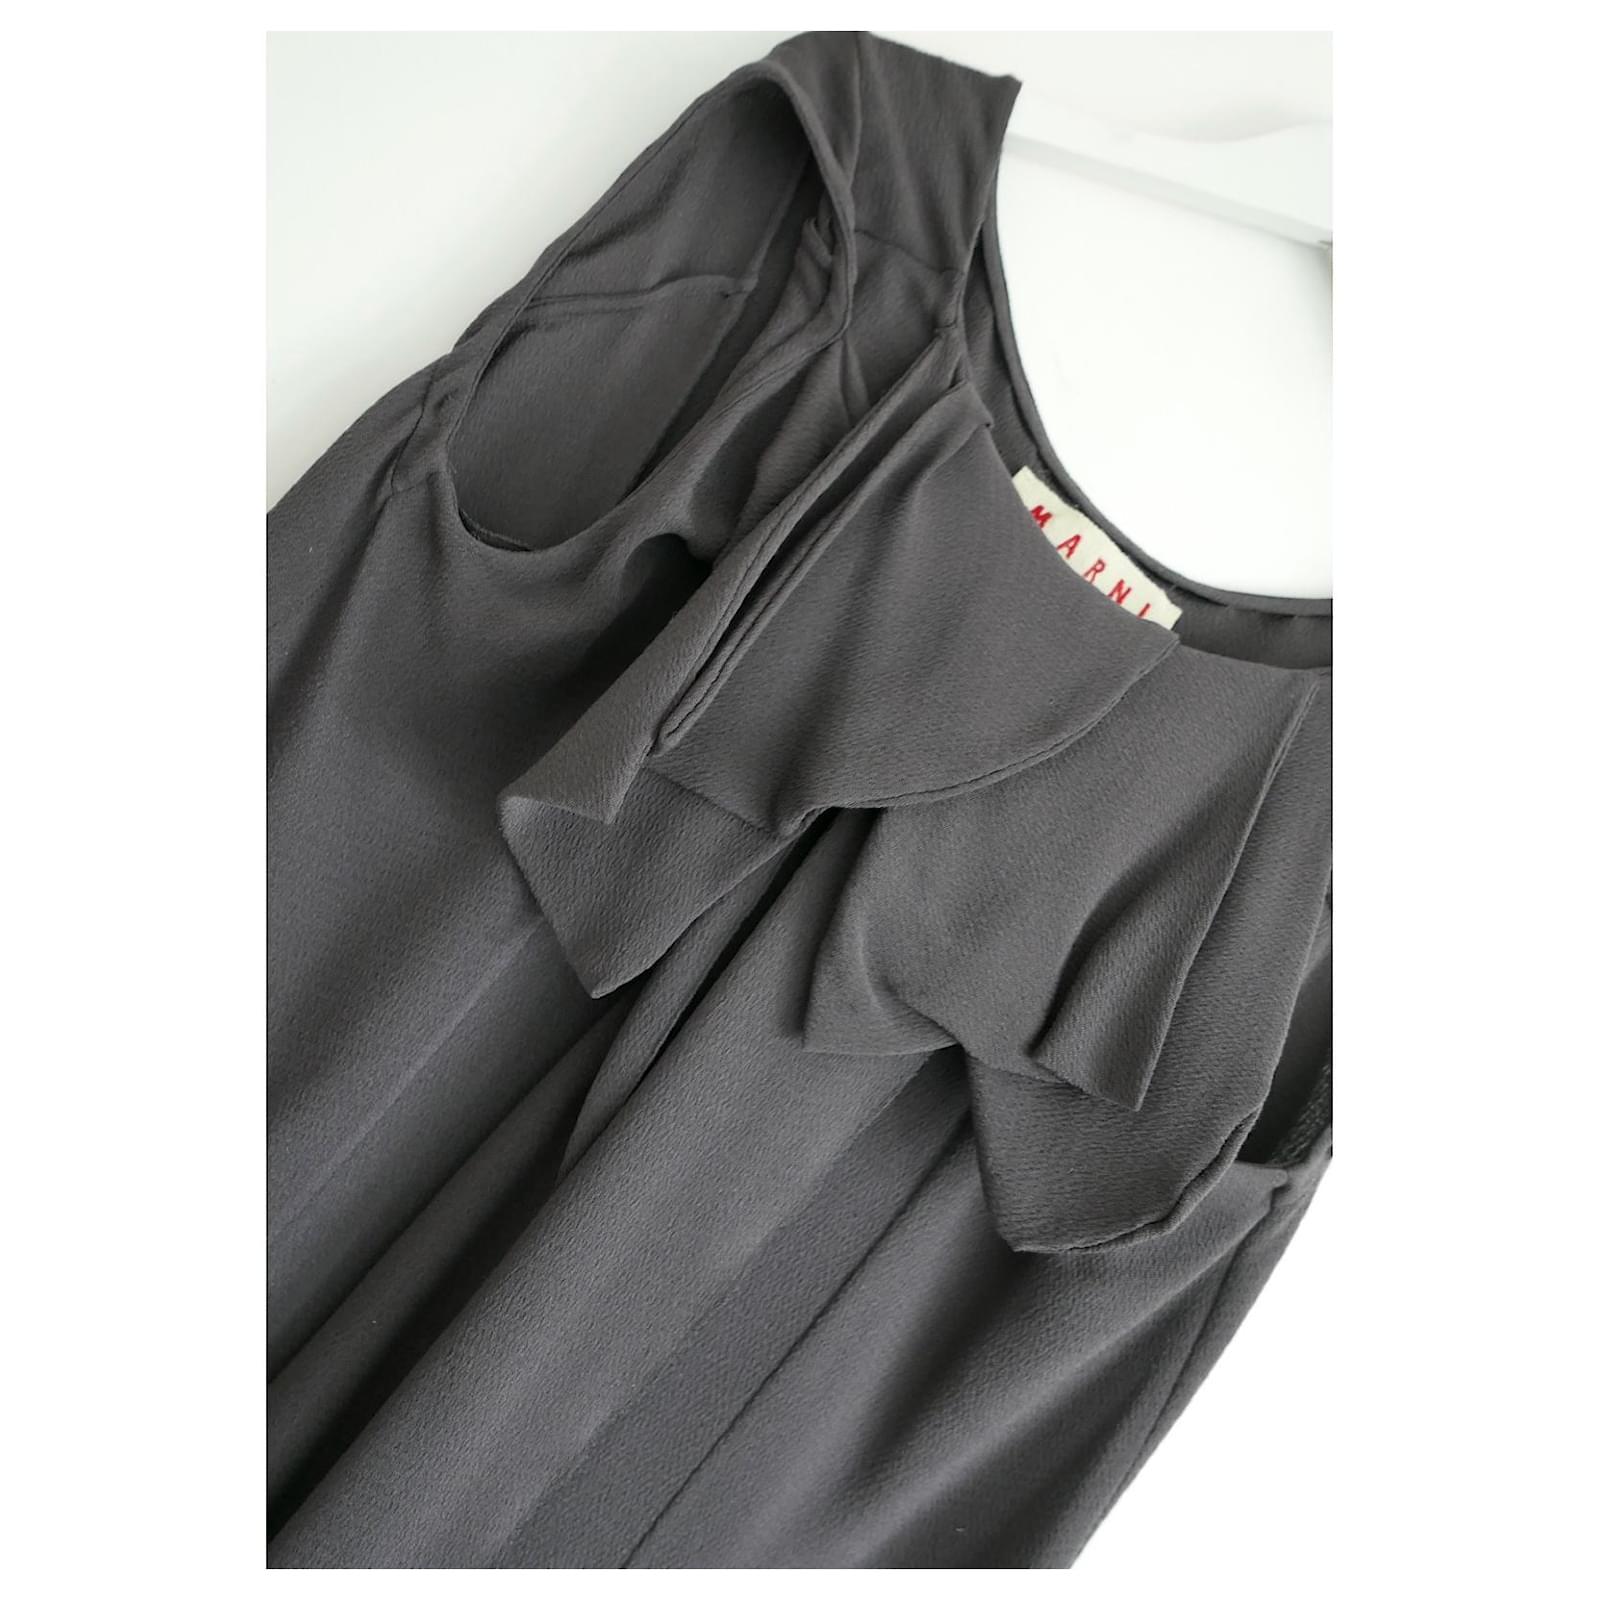 Gorgeously draped Marni top - worn once. Made from soft matte grey silk crepe, it has soft deconstructed bow the front, curved arm holes which are set slightly forward and panelled body. Size IT40/UK8. Measure approx - bust/waist 38” and length 24”
